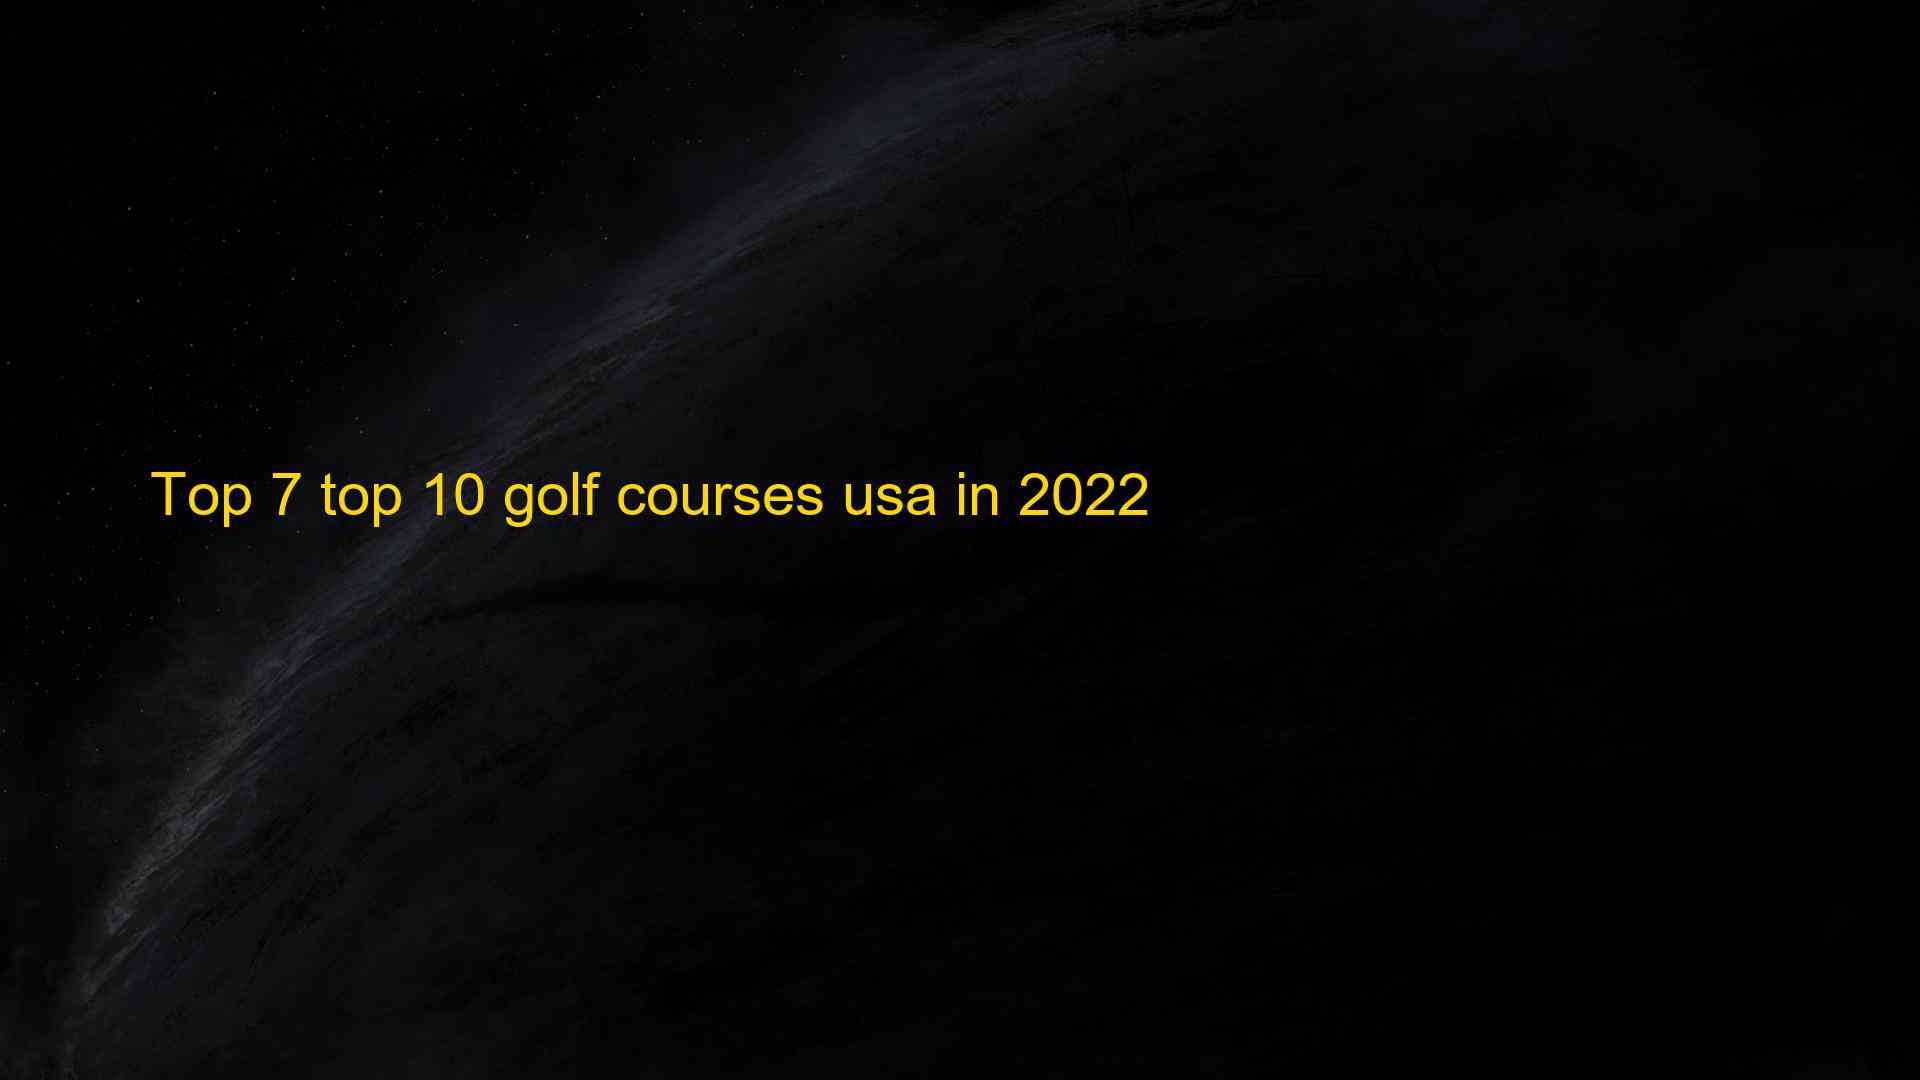 Top 7 top 10 golf courses usa in 2022 1660970014